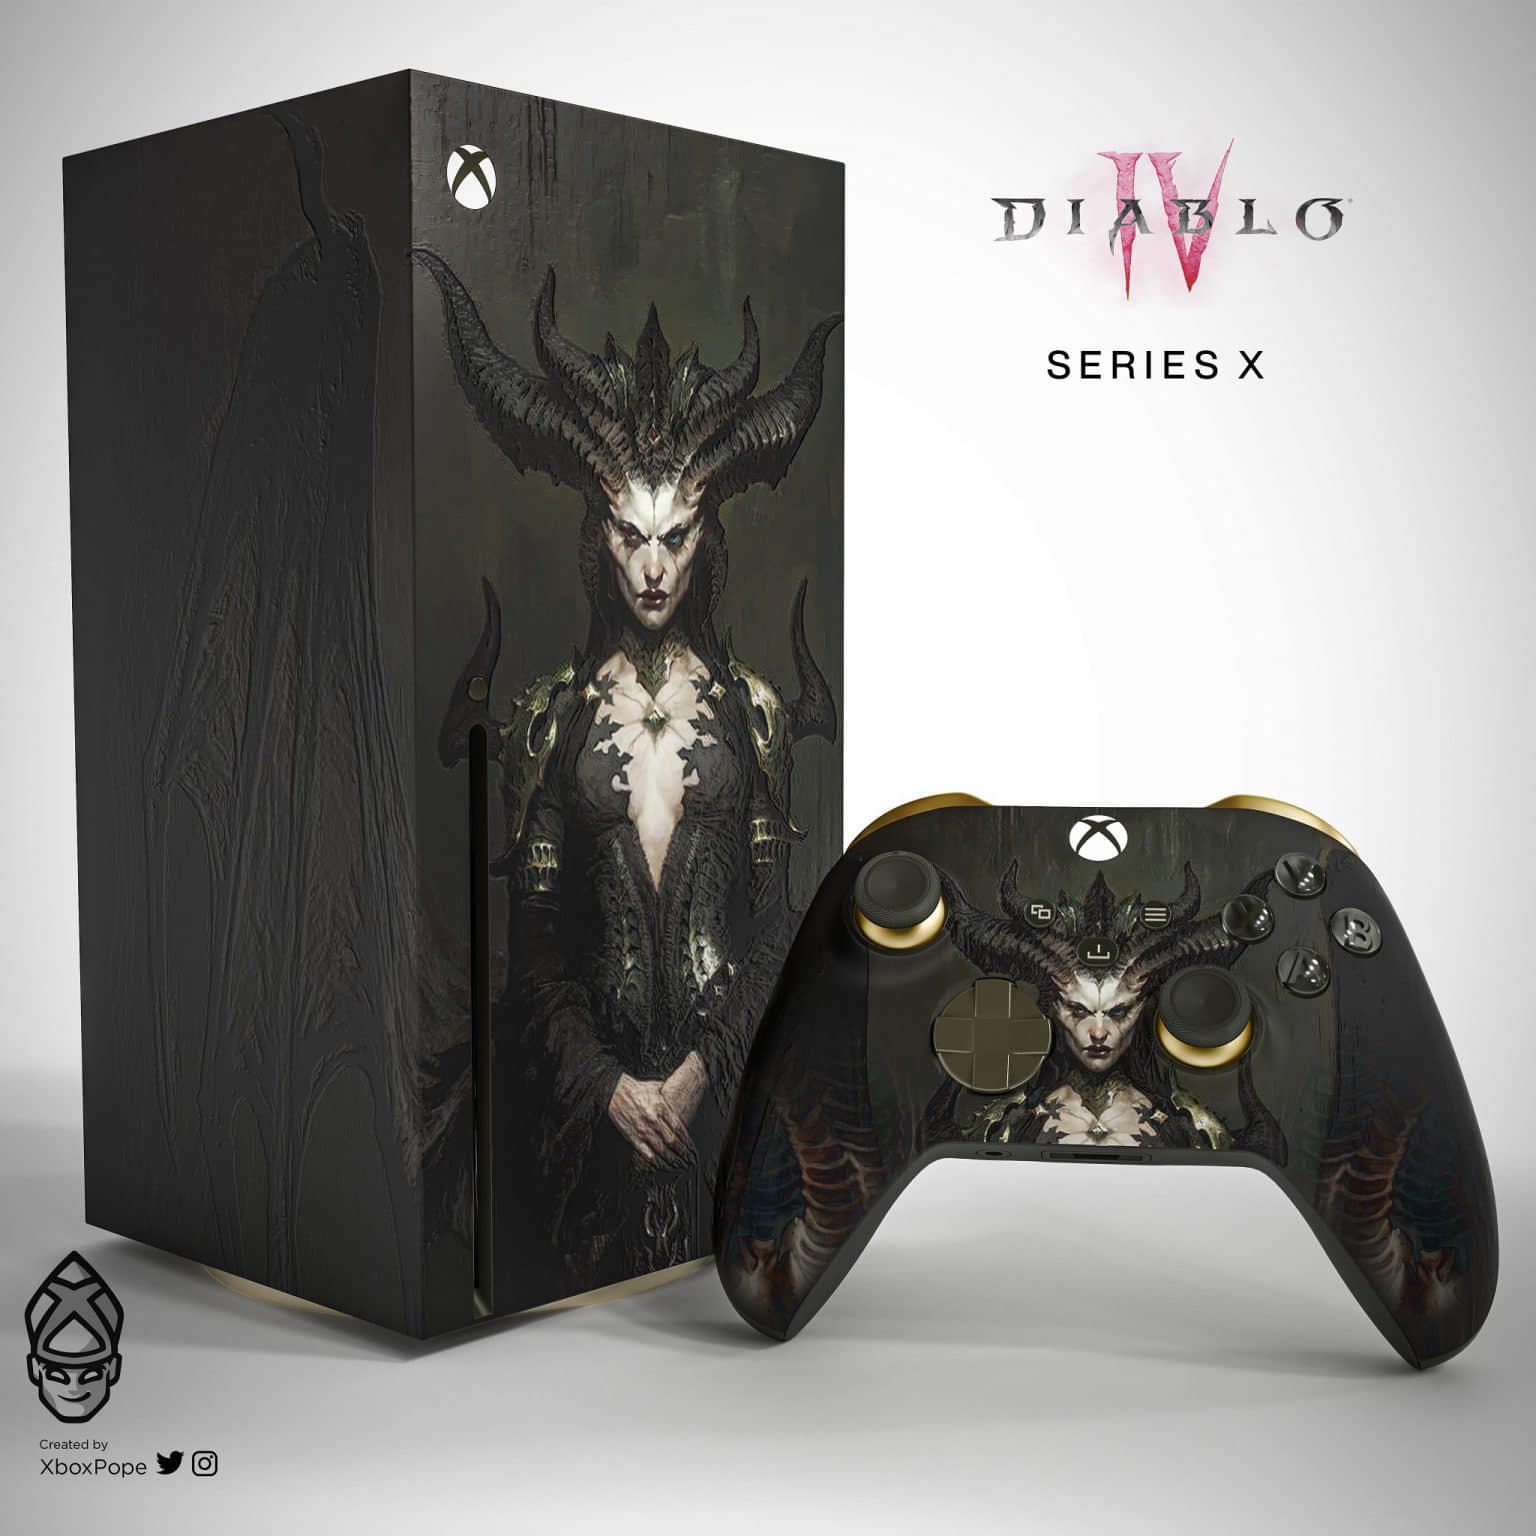 what console will diablo 4 be on